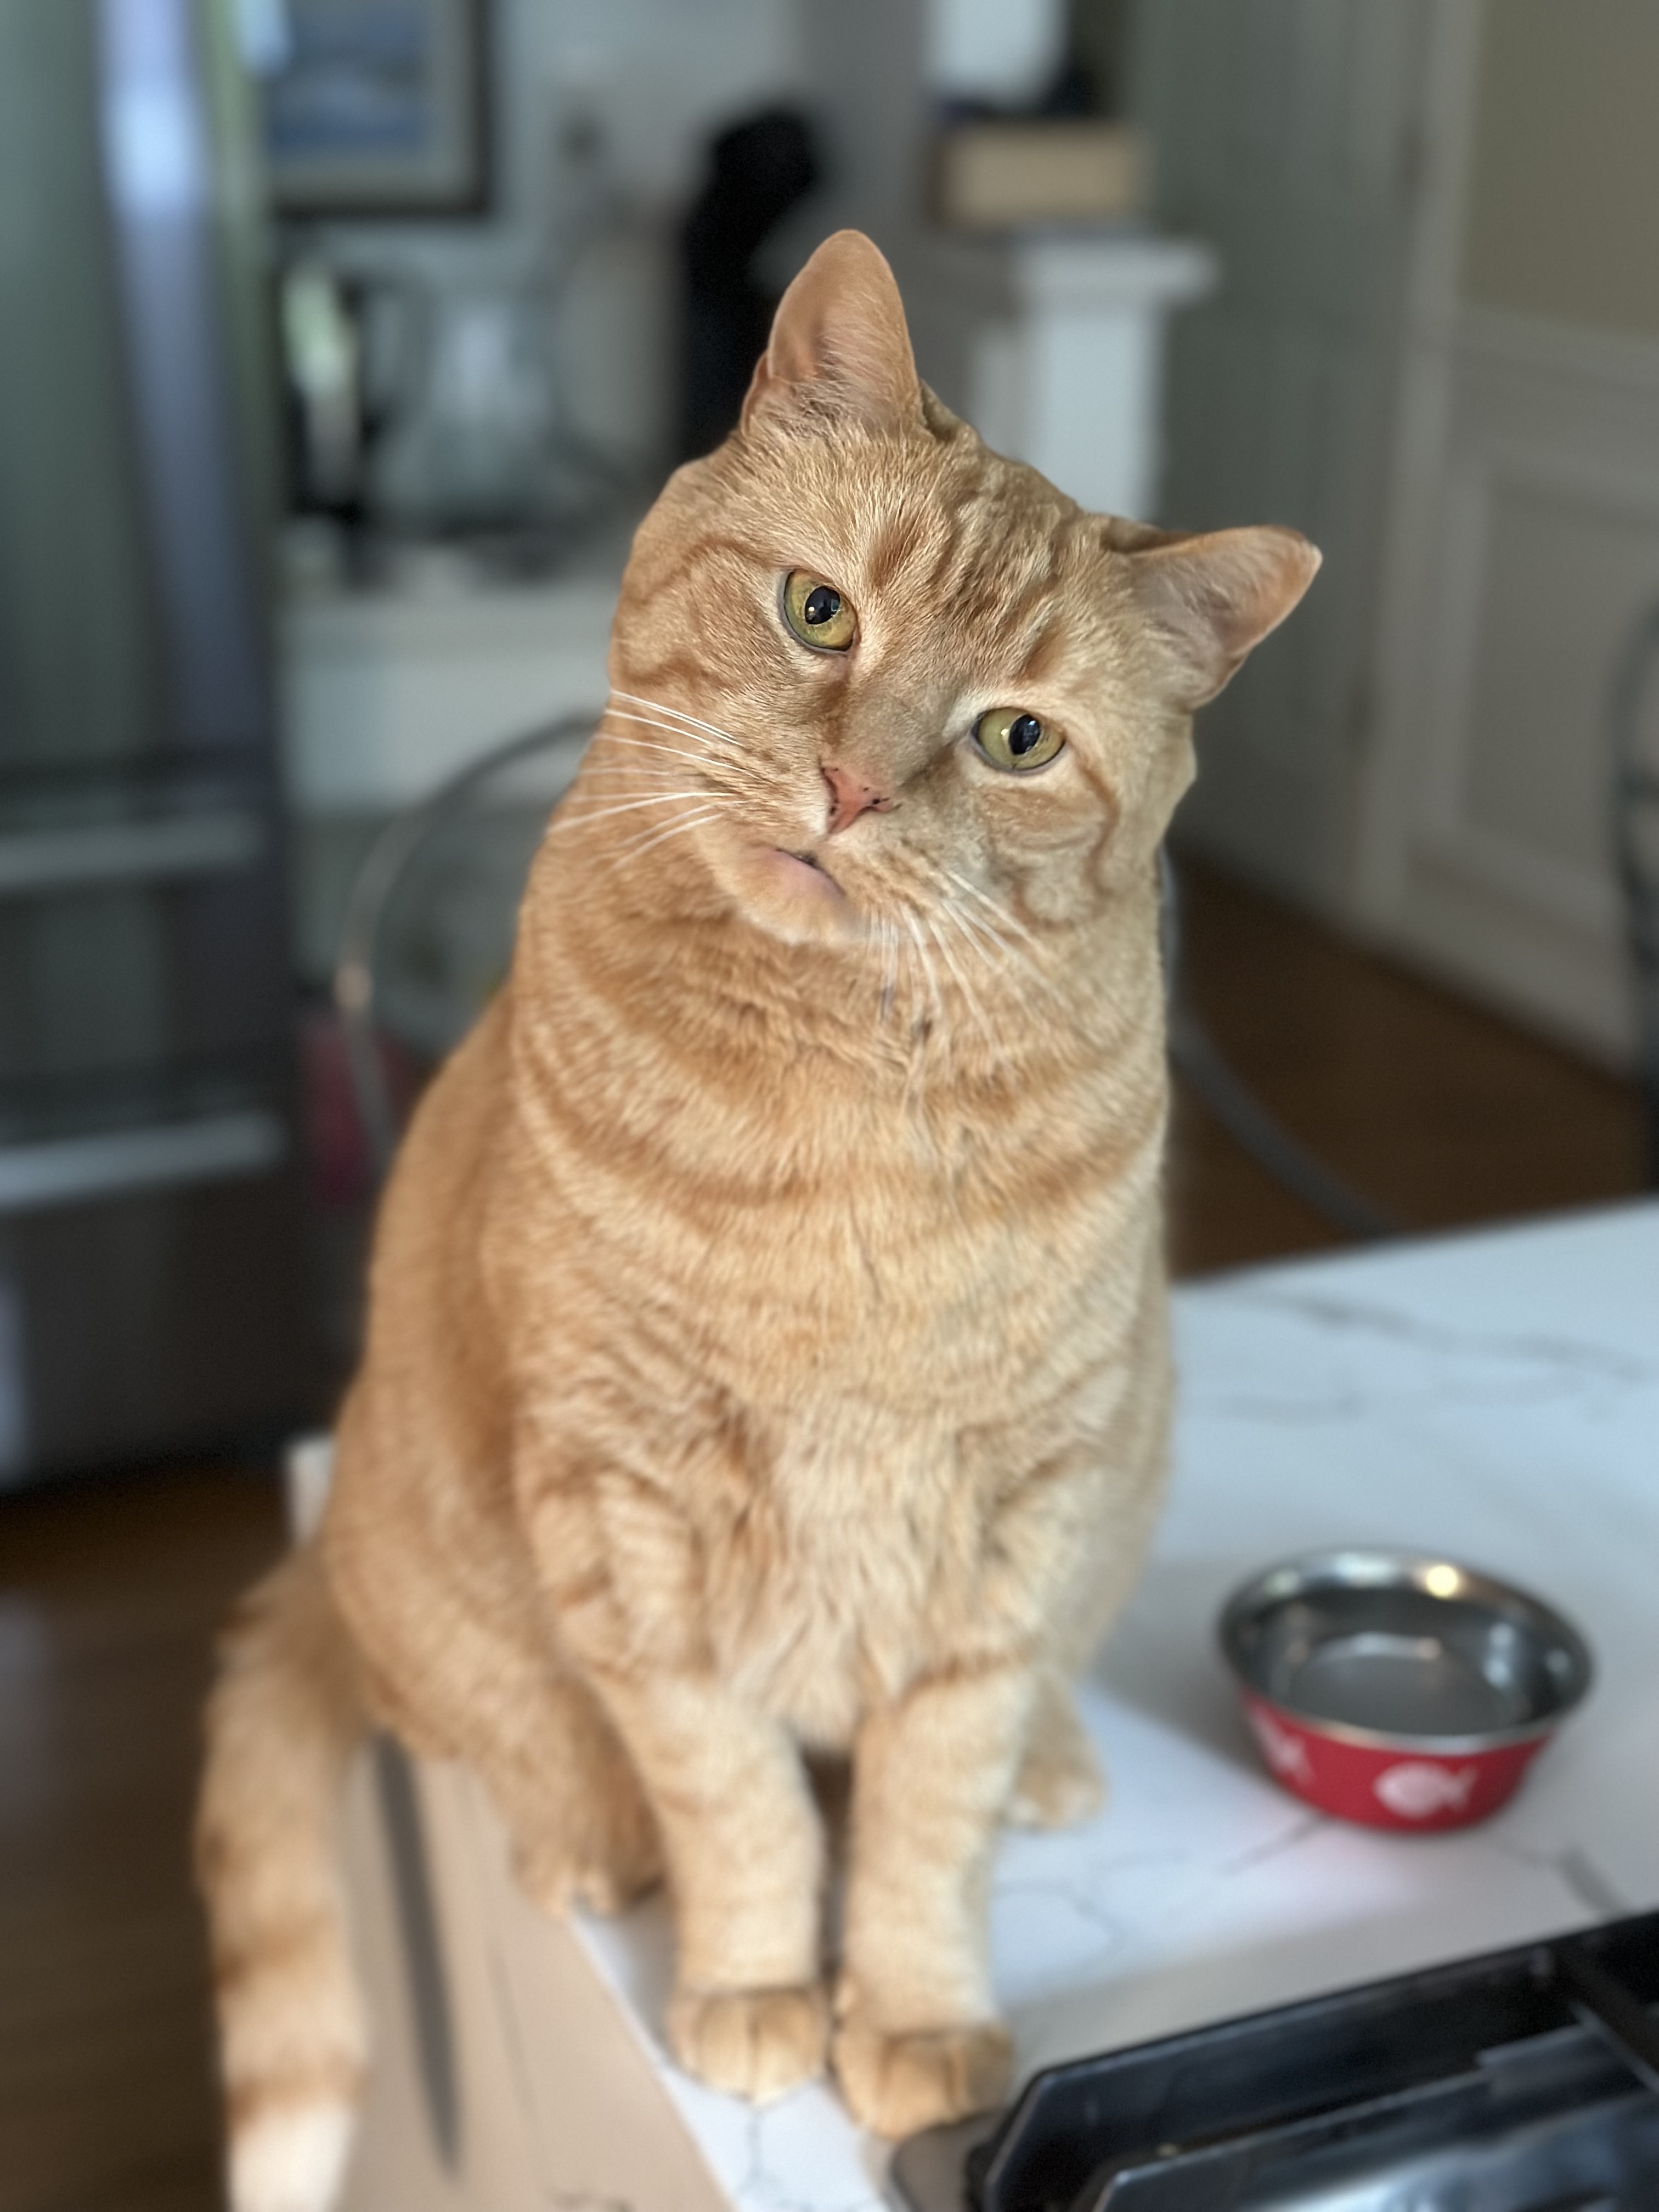 An orange cat sits on a counter